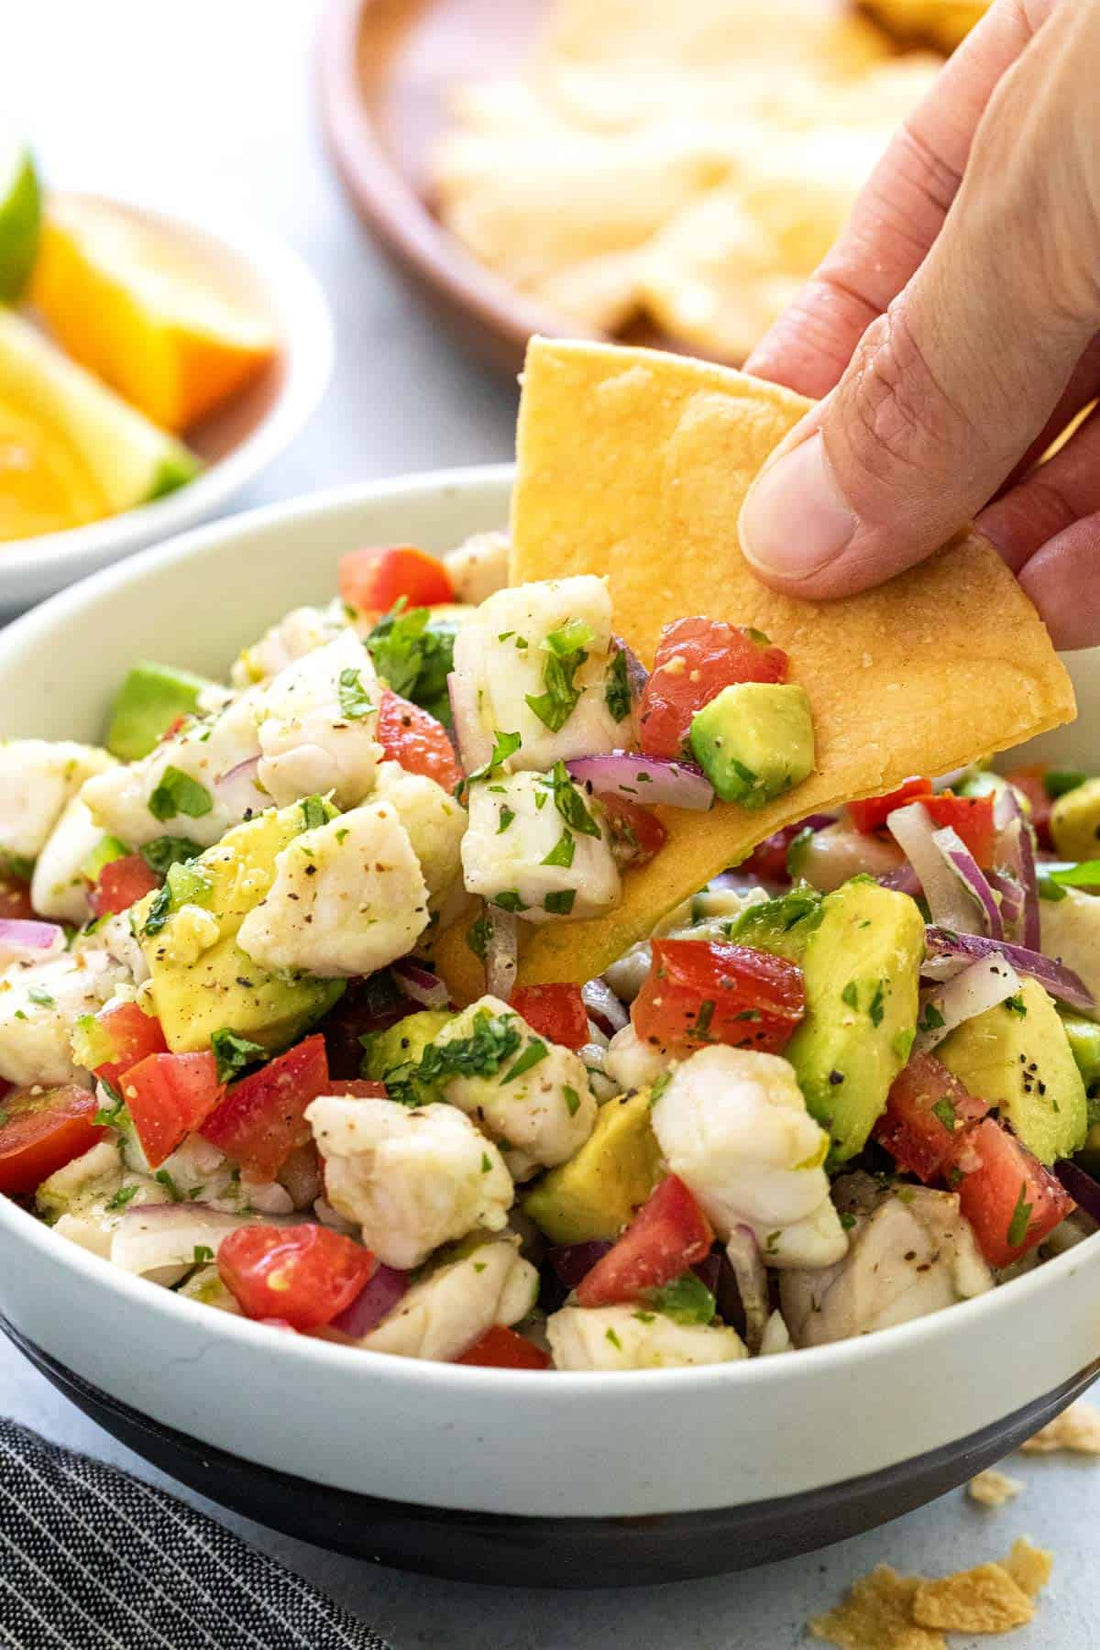 RED SNAPPER CEVICHE